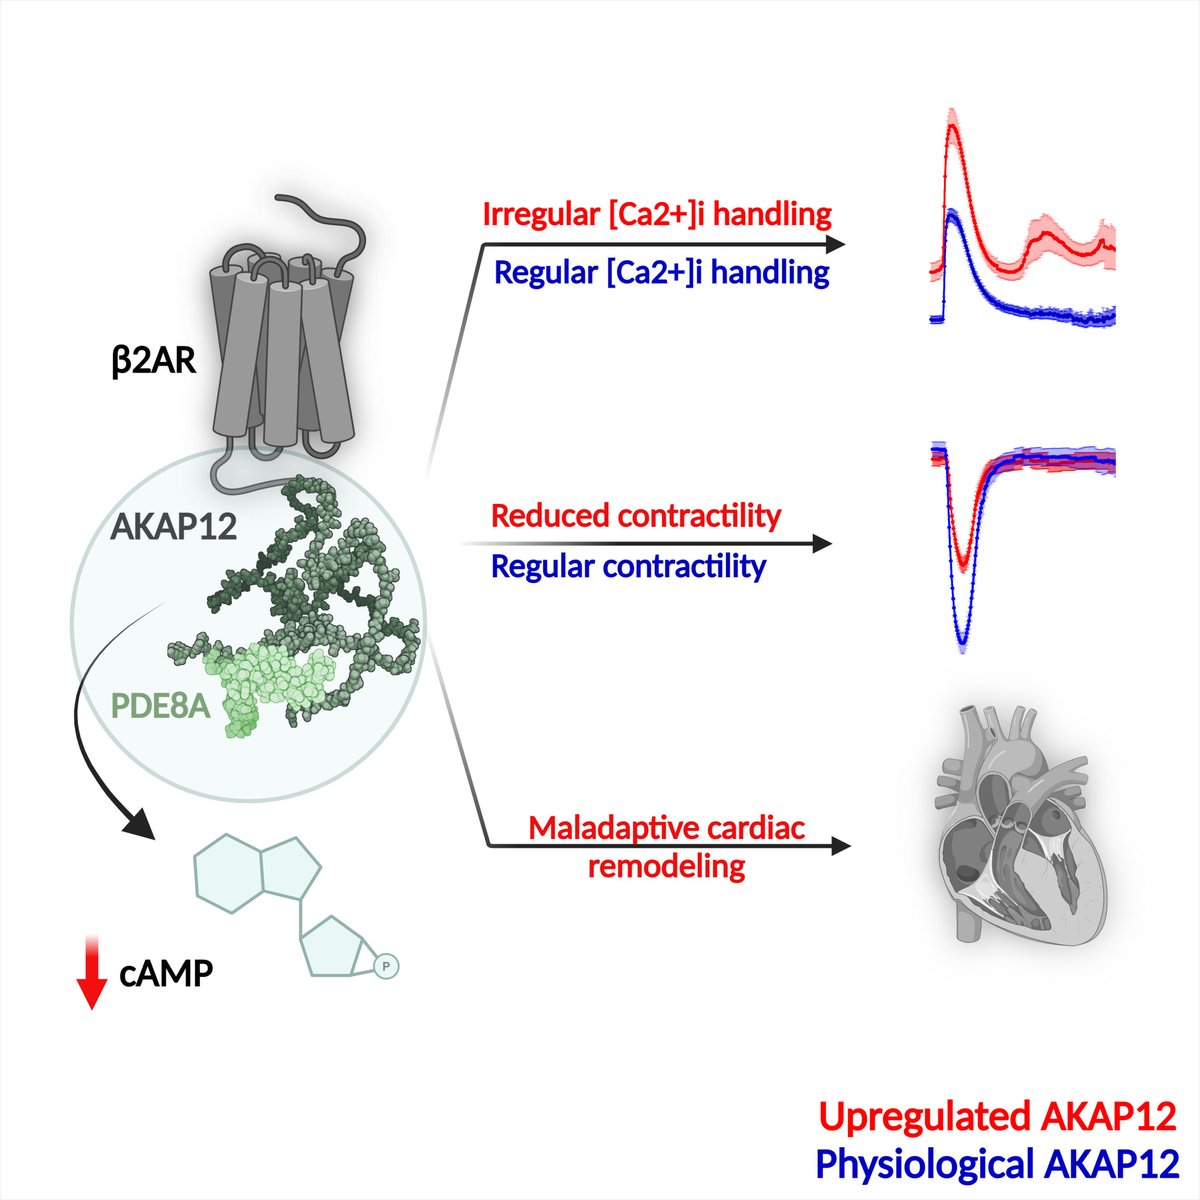 Qasim & colleagues found that AKAP12 upregulation in cardiac tissue accelerates cardiac maladaptive remodeling in animal models, & patients with end-stage heart failure have upregulation of AKAP12. Learn more at ahajournals.org/doi/10.1161/CI…